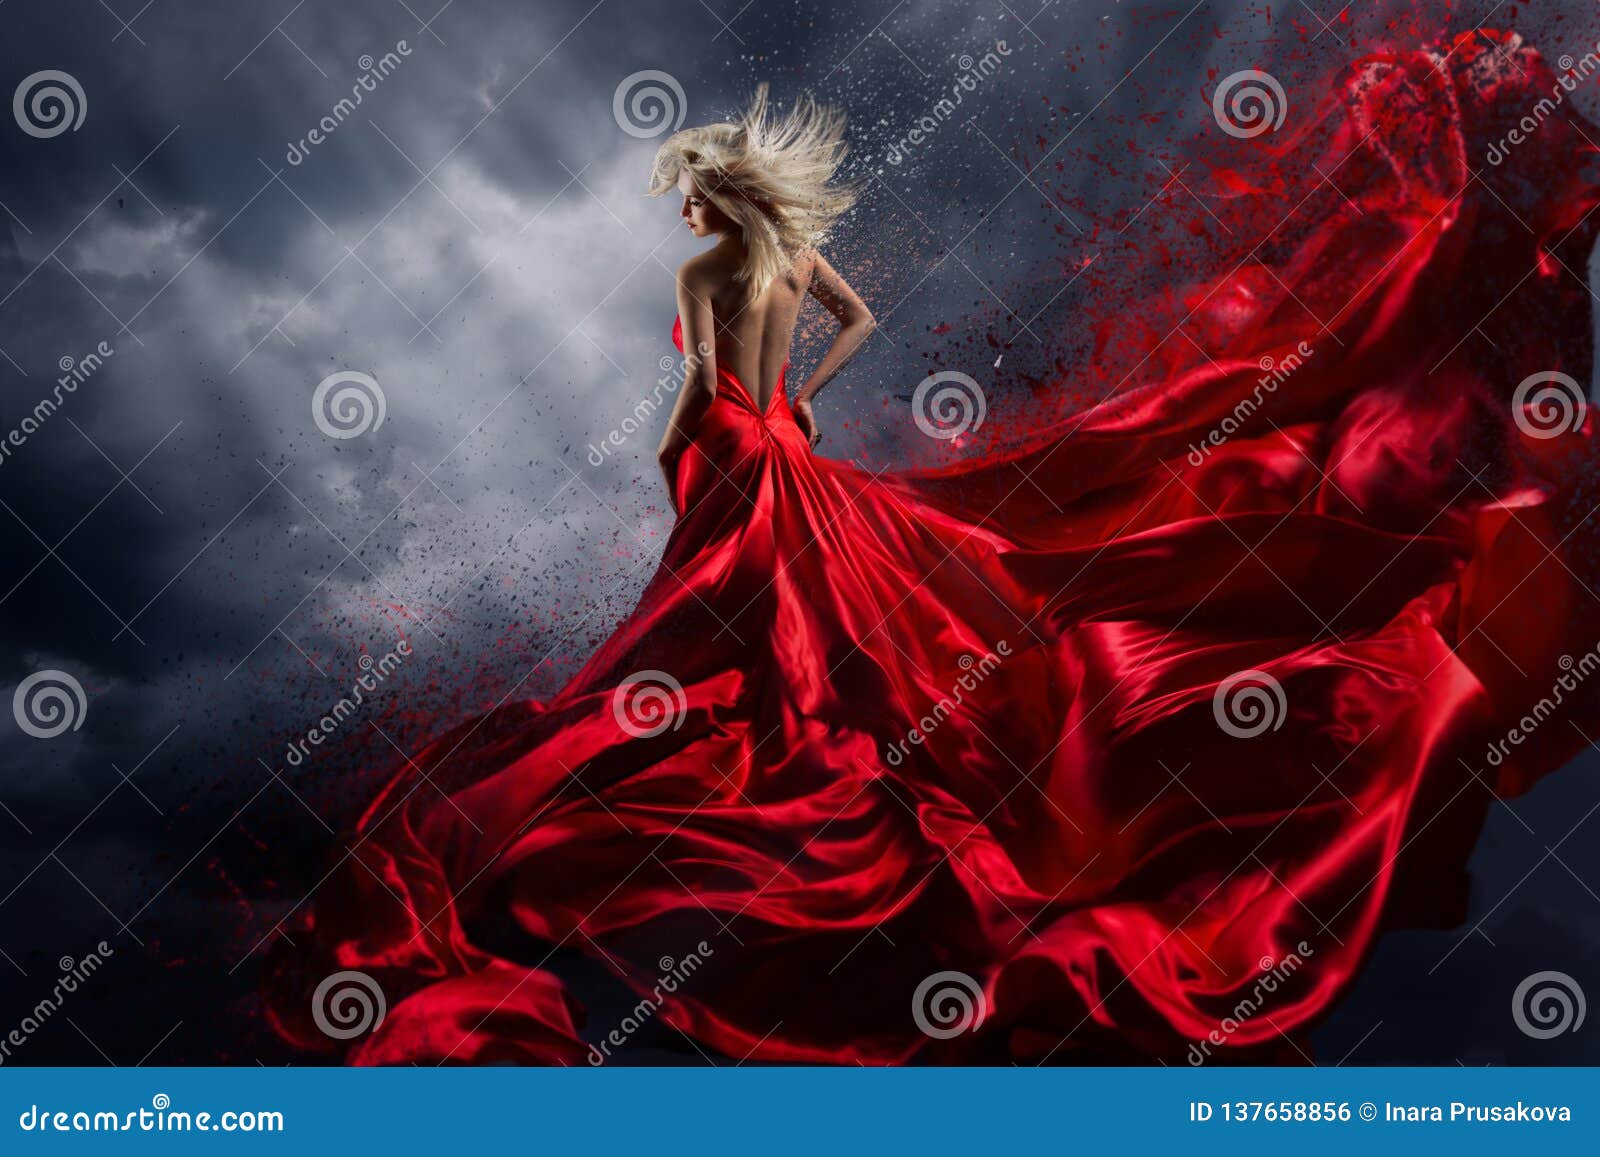 woman in red dress dance over storm sky, gown fluttering fabric